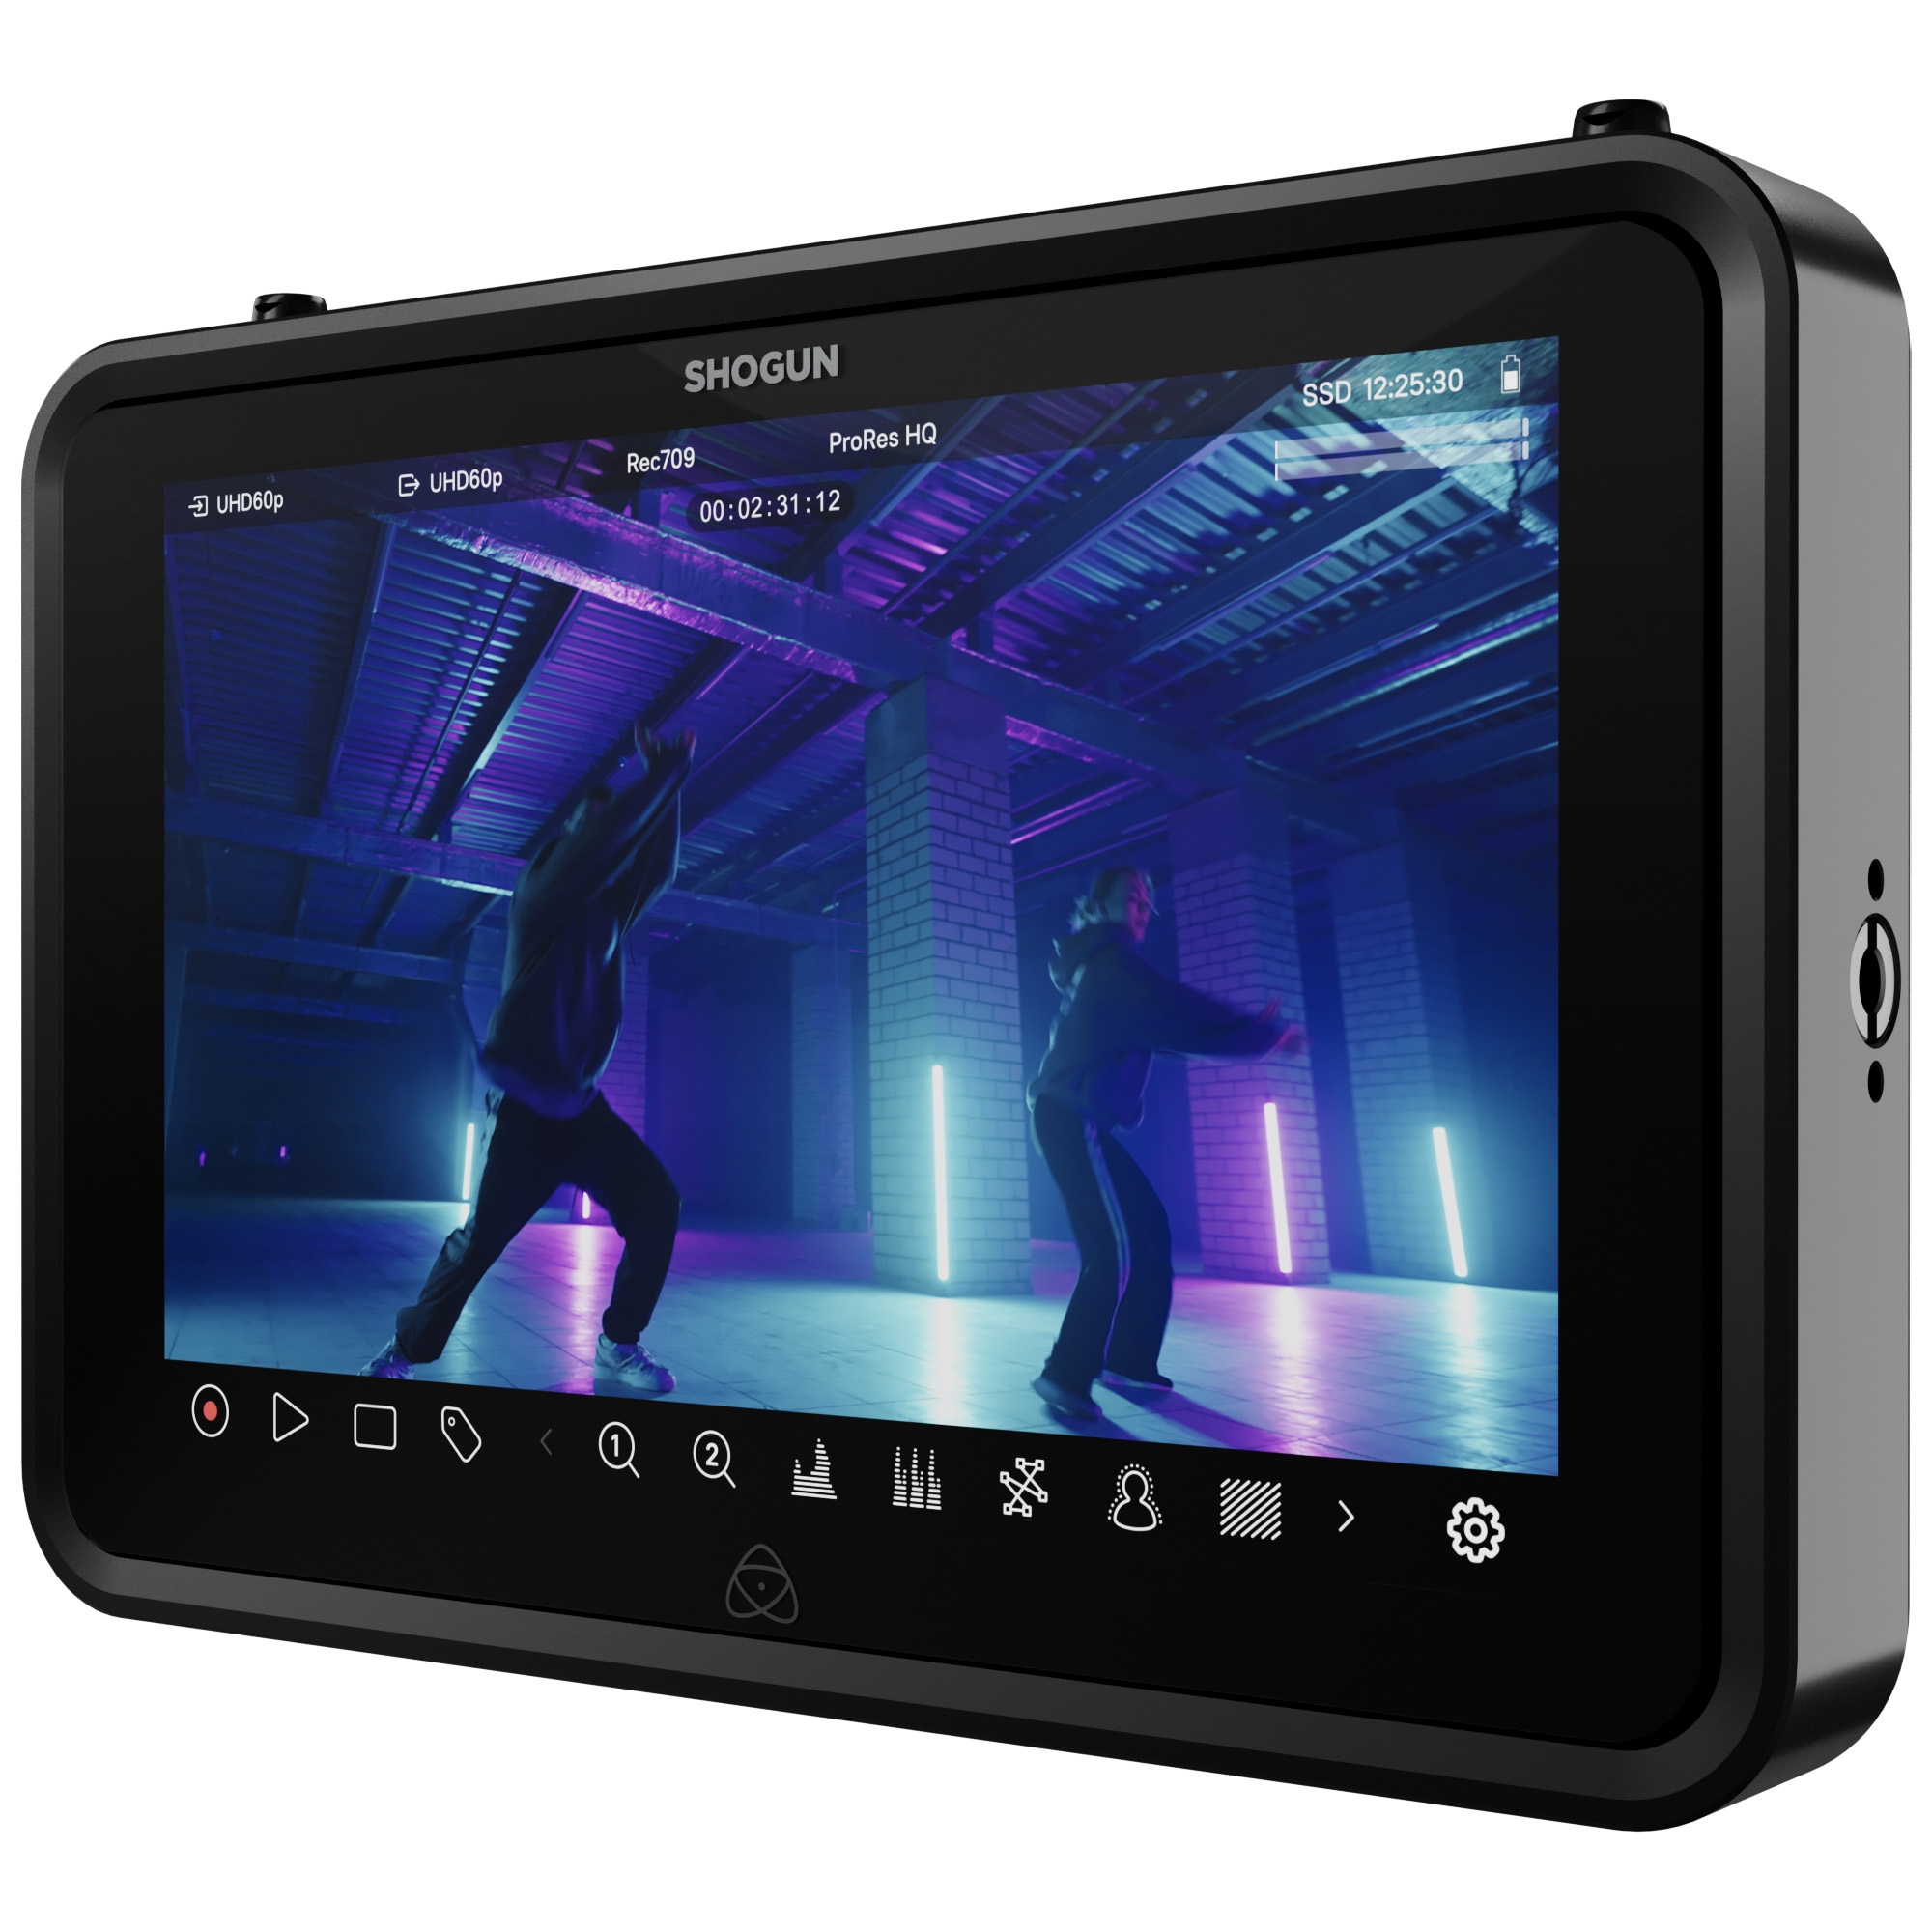 Atomos Shogun 7-inch monitor-recorder with integrated networking